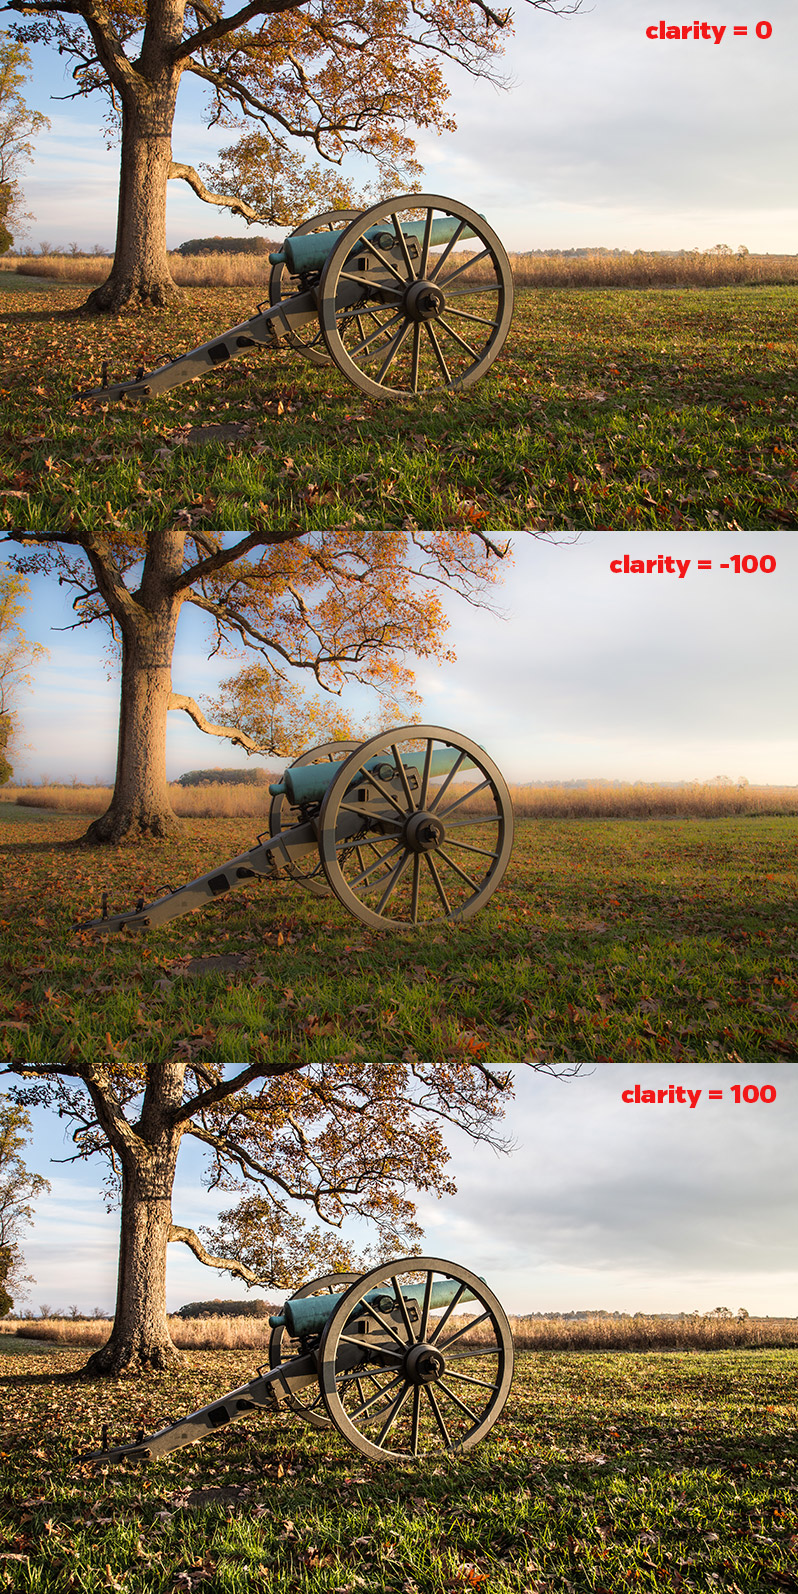 Working with Clarity, Vibrance, and Saturation in Lightroom